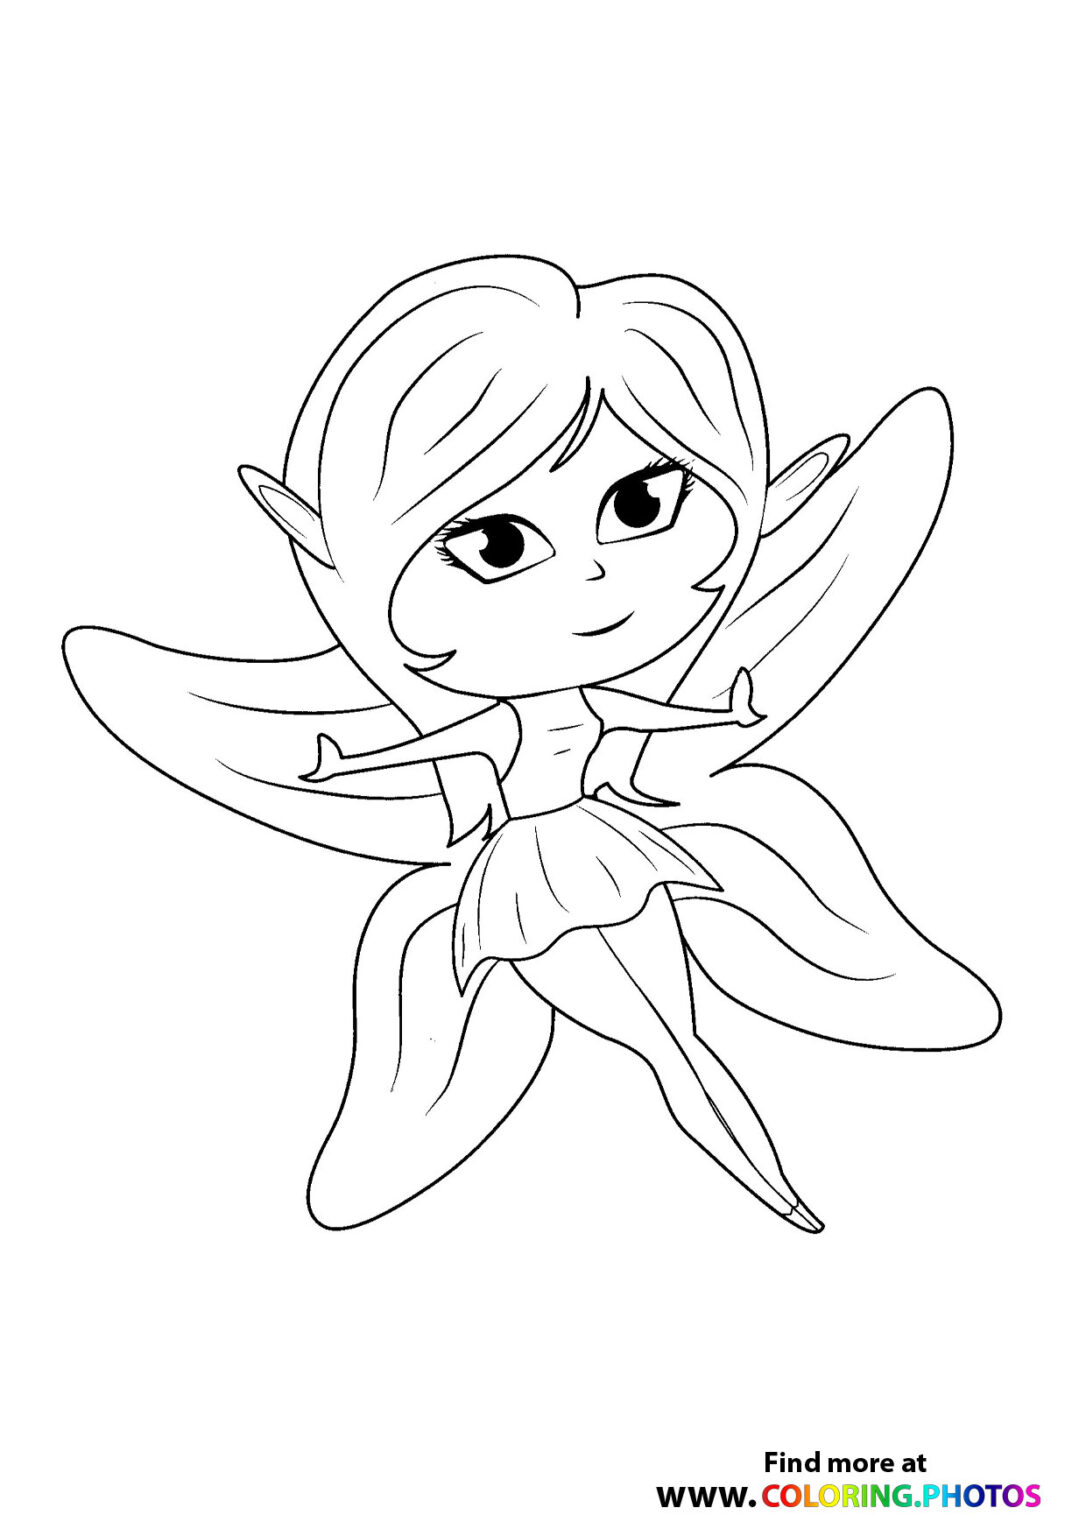 Fairy butterfly - Coloring Pages for kids